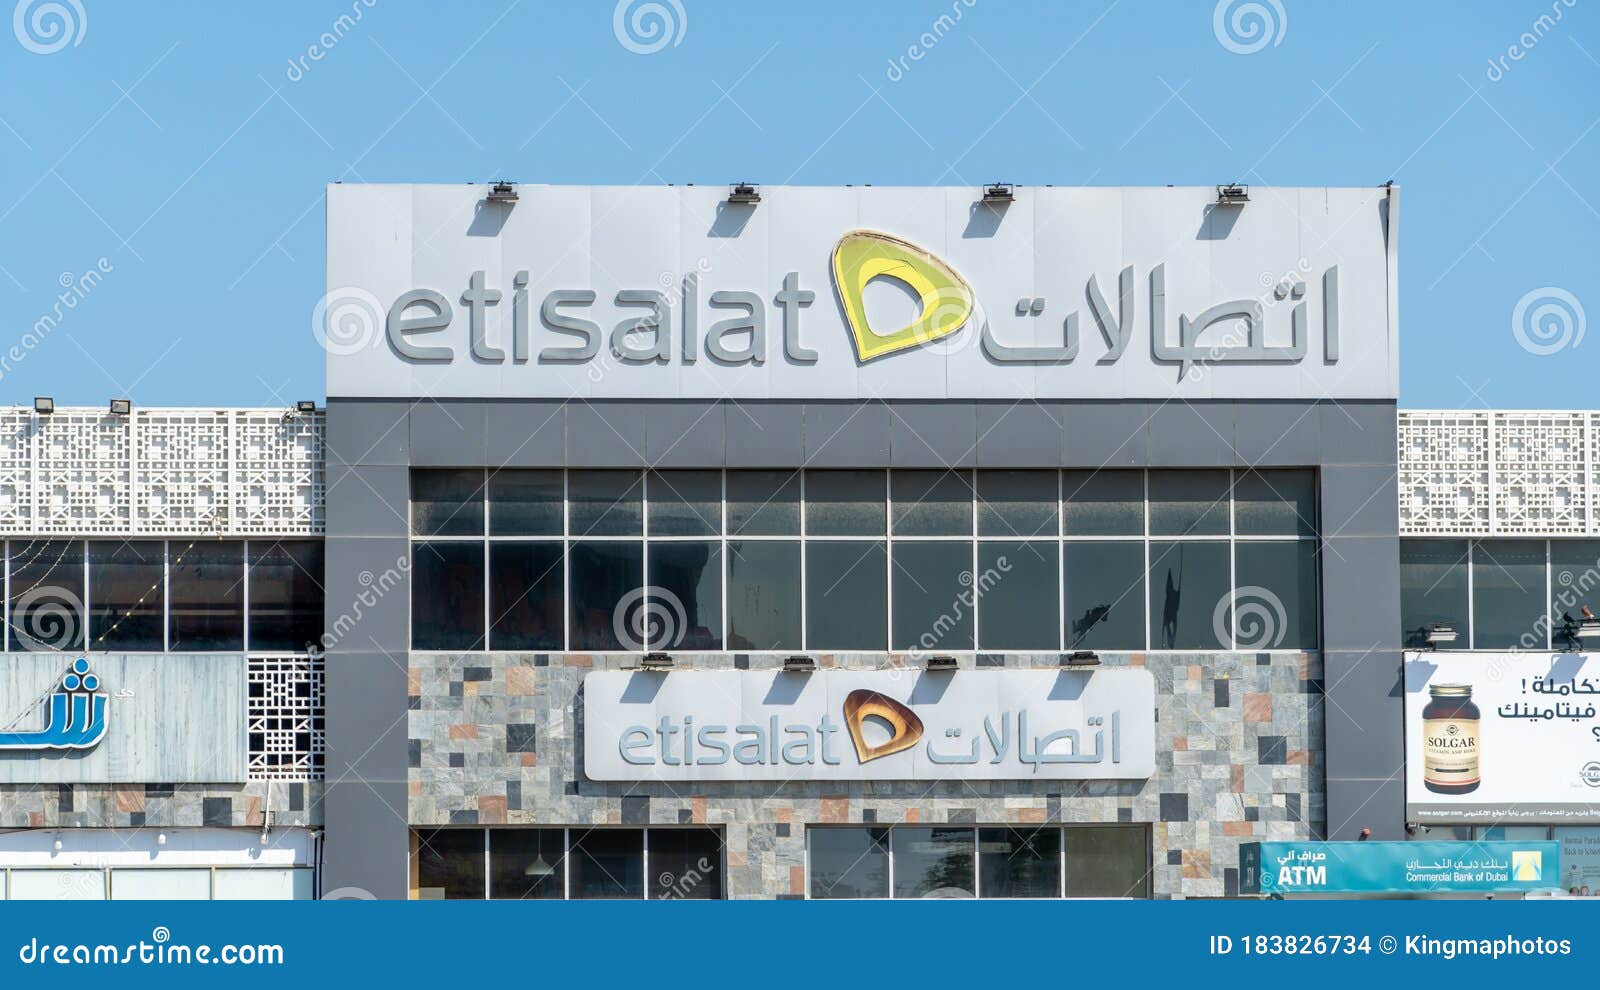 How Etisalat Business Can Help Your Business Grow